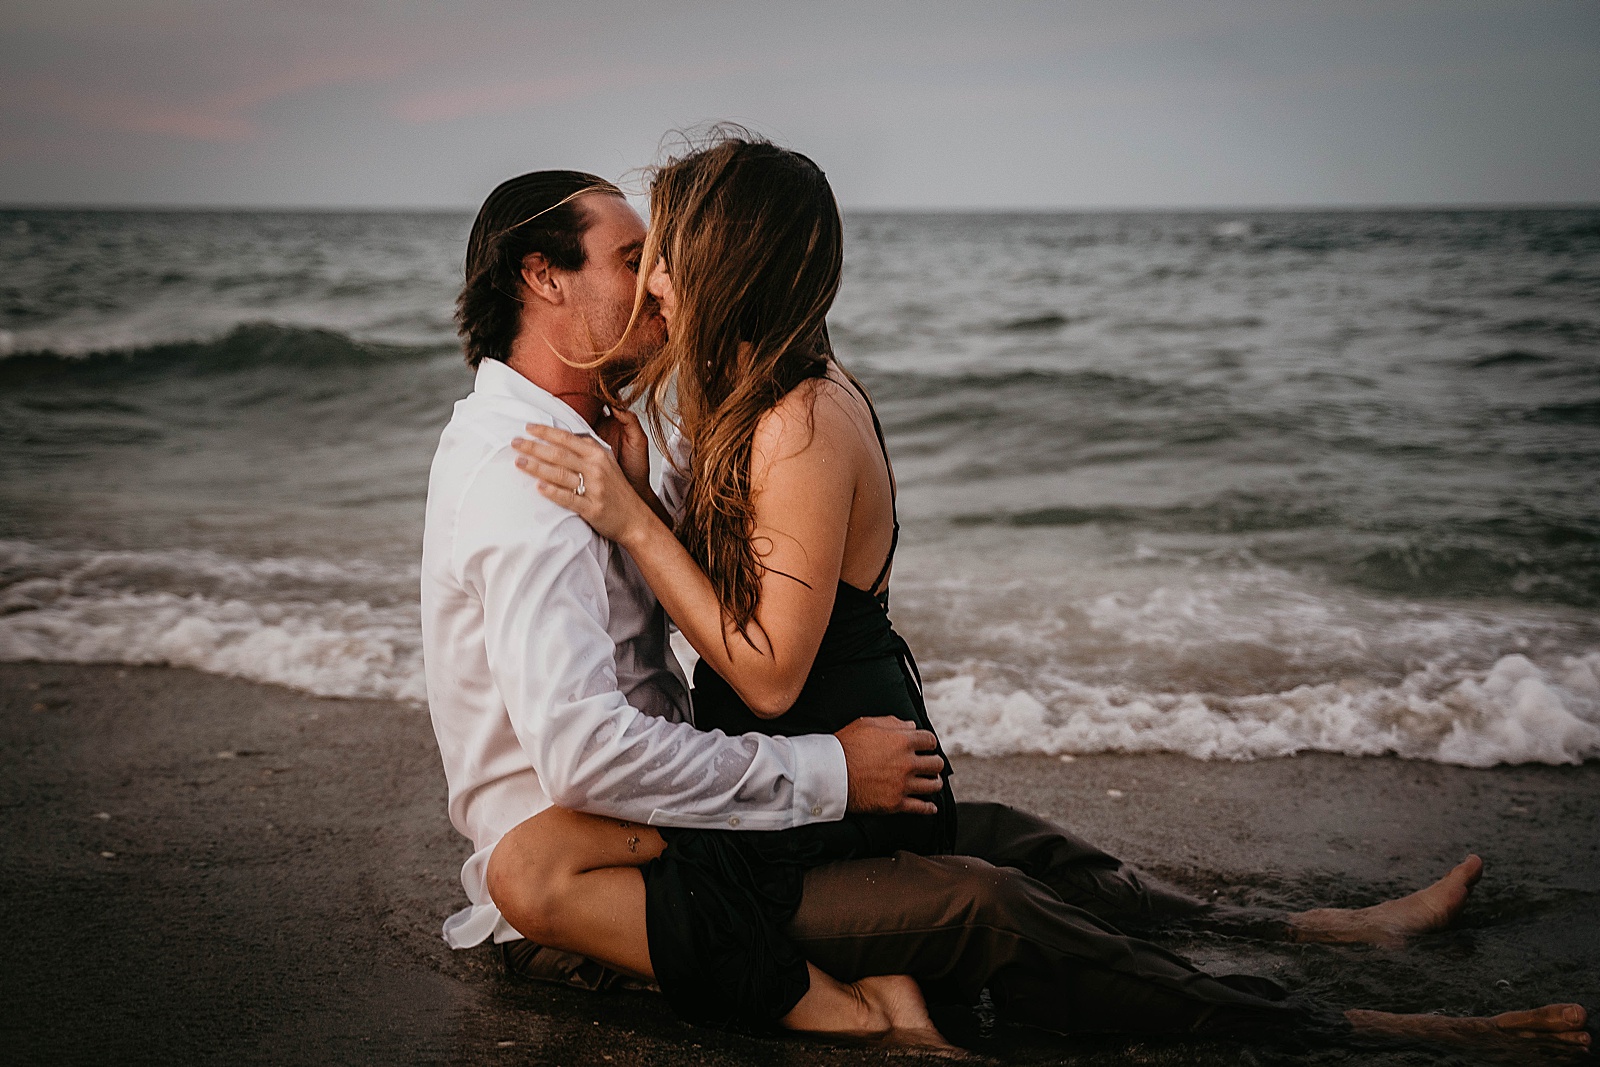 Juno Beach Engagement Photos captured by South Florida Engagement Photographer, Krystal Capone Photography